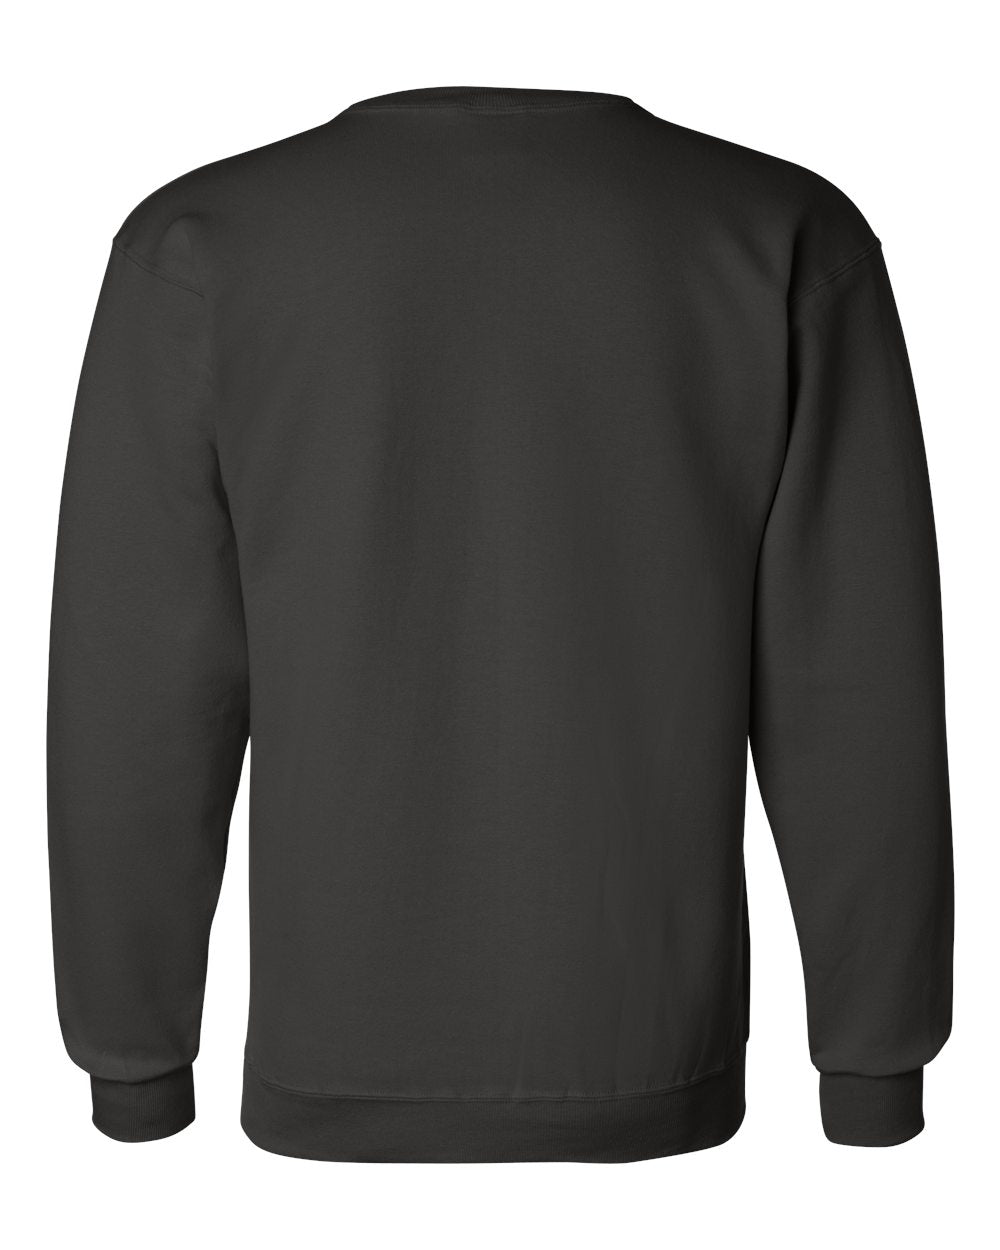 fully customizable champion power blend crewneck sweater for your brand in multiple colors